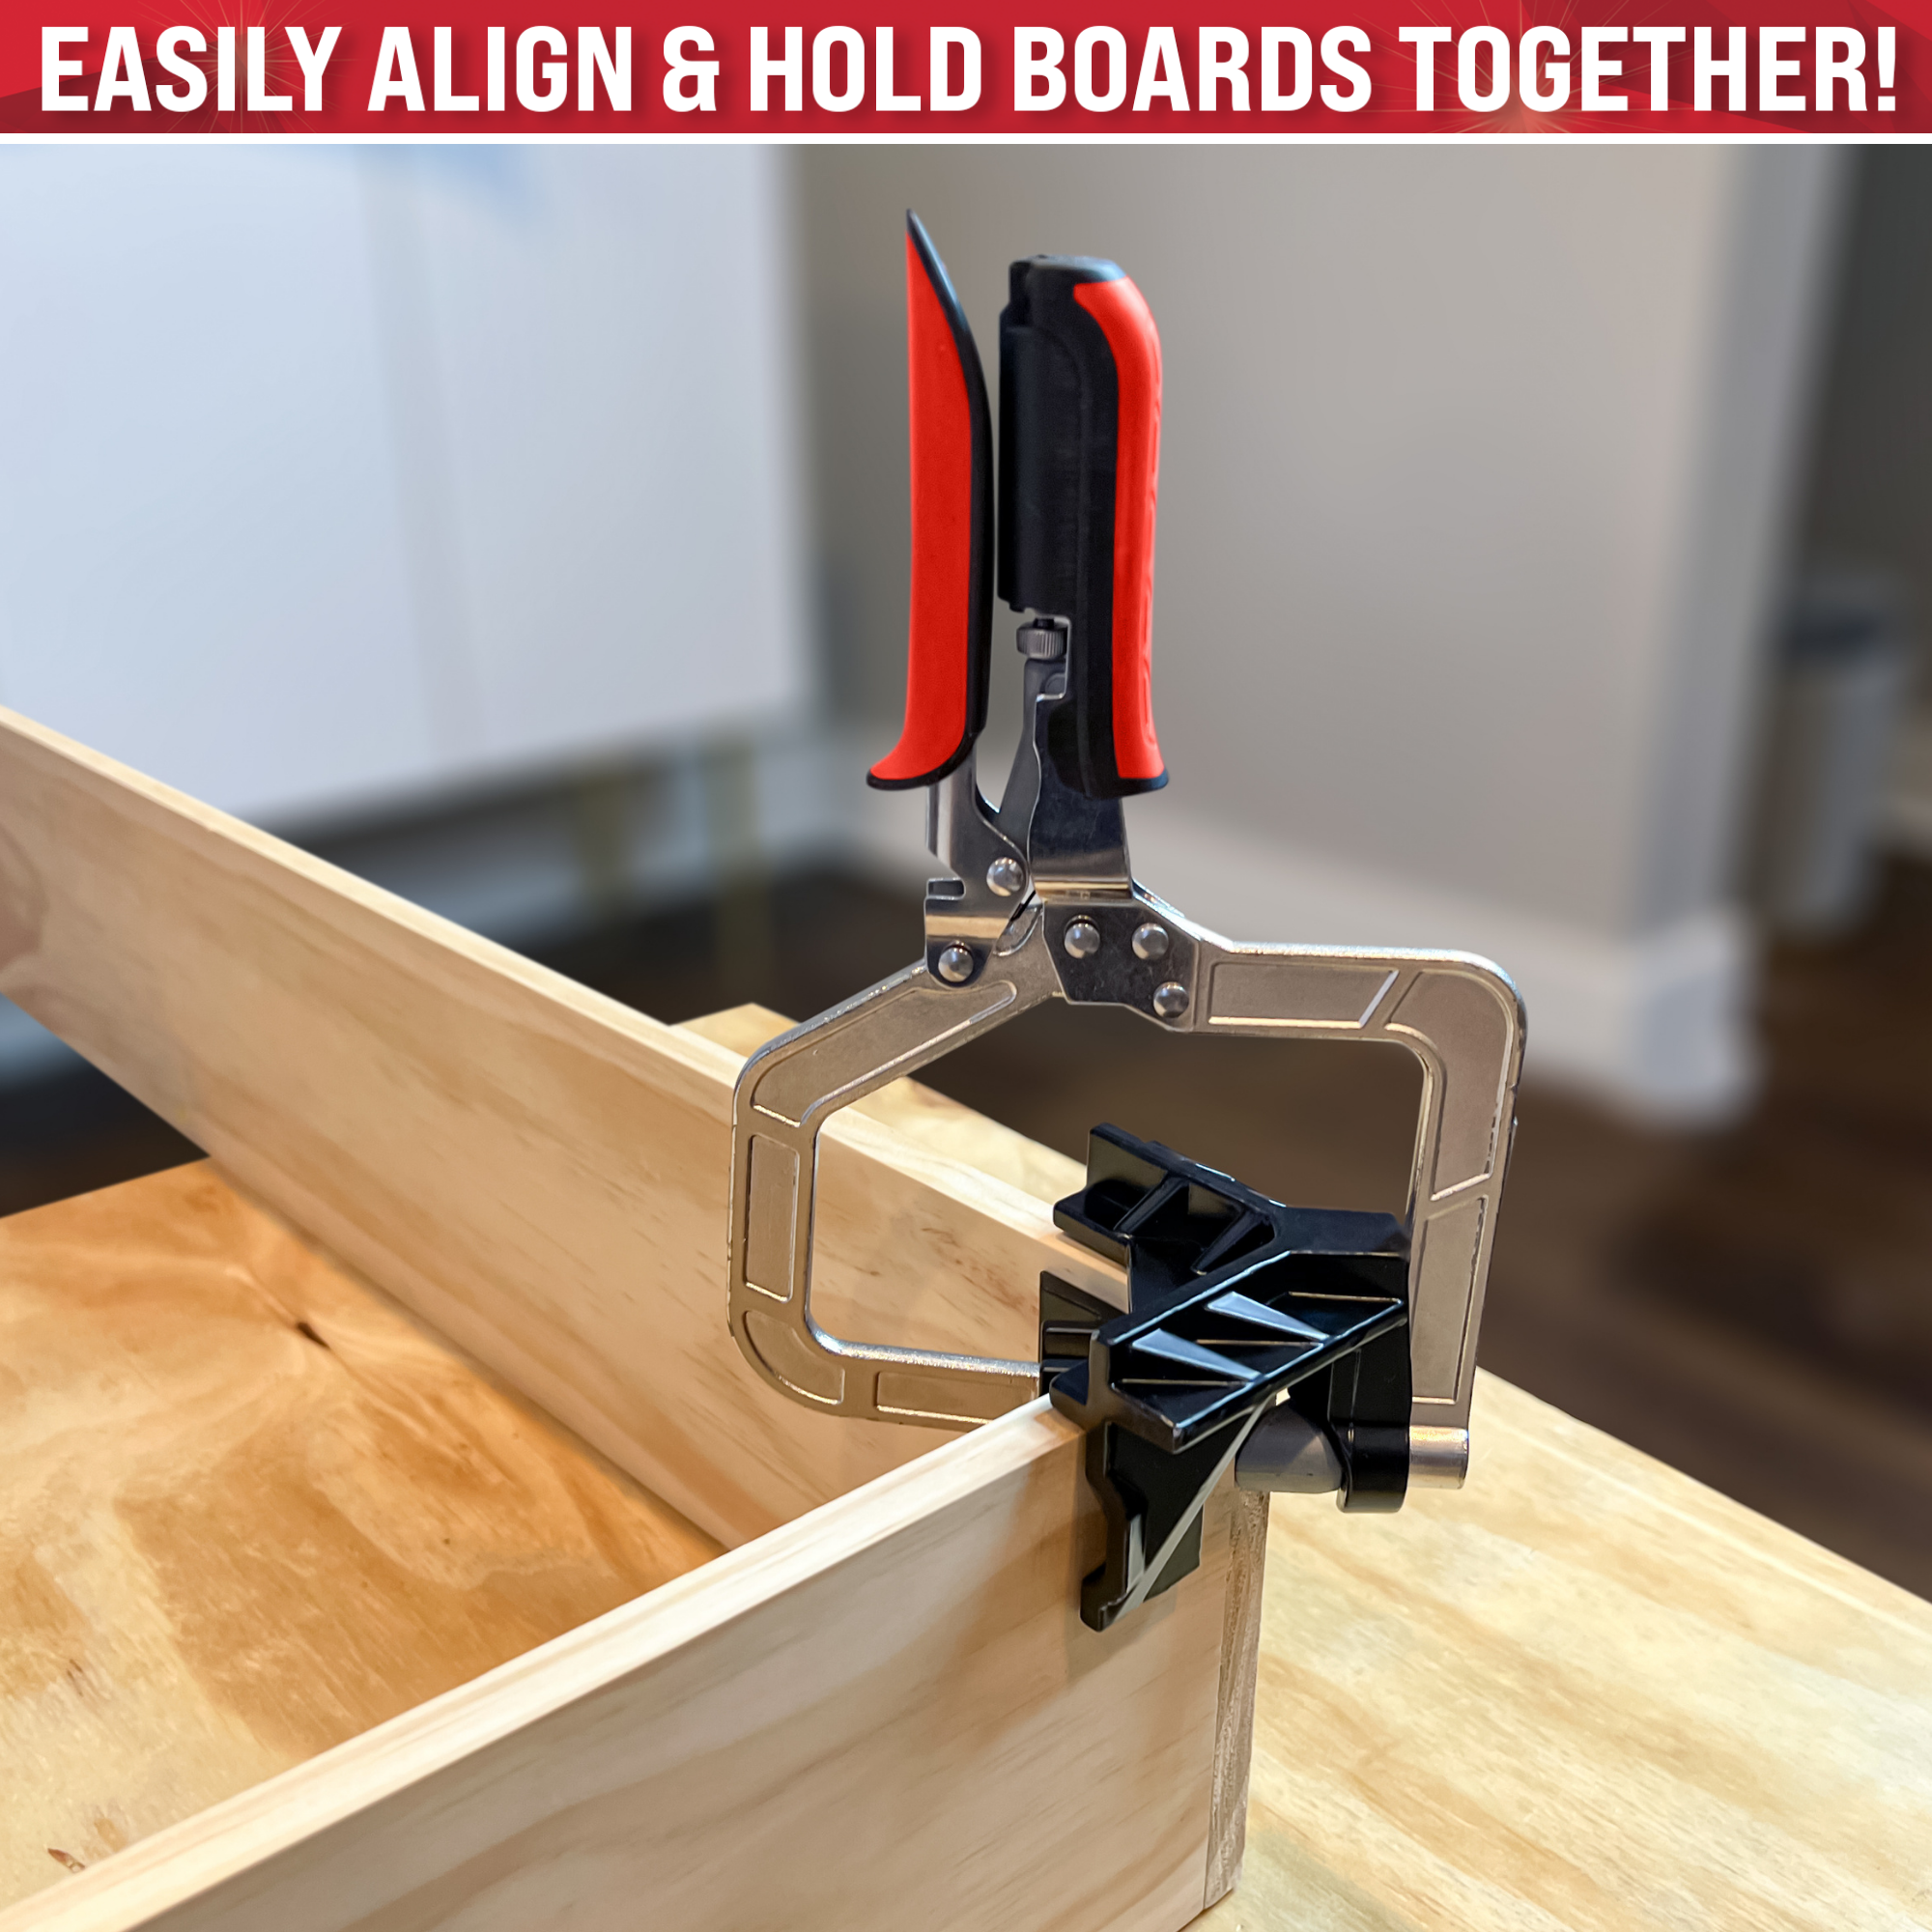 90° Corner Clamp  Kreg jig projects, Pocket hole joinery, Clamp